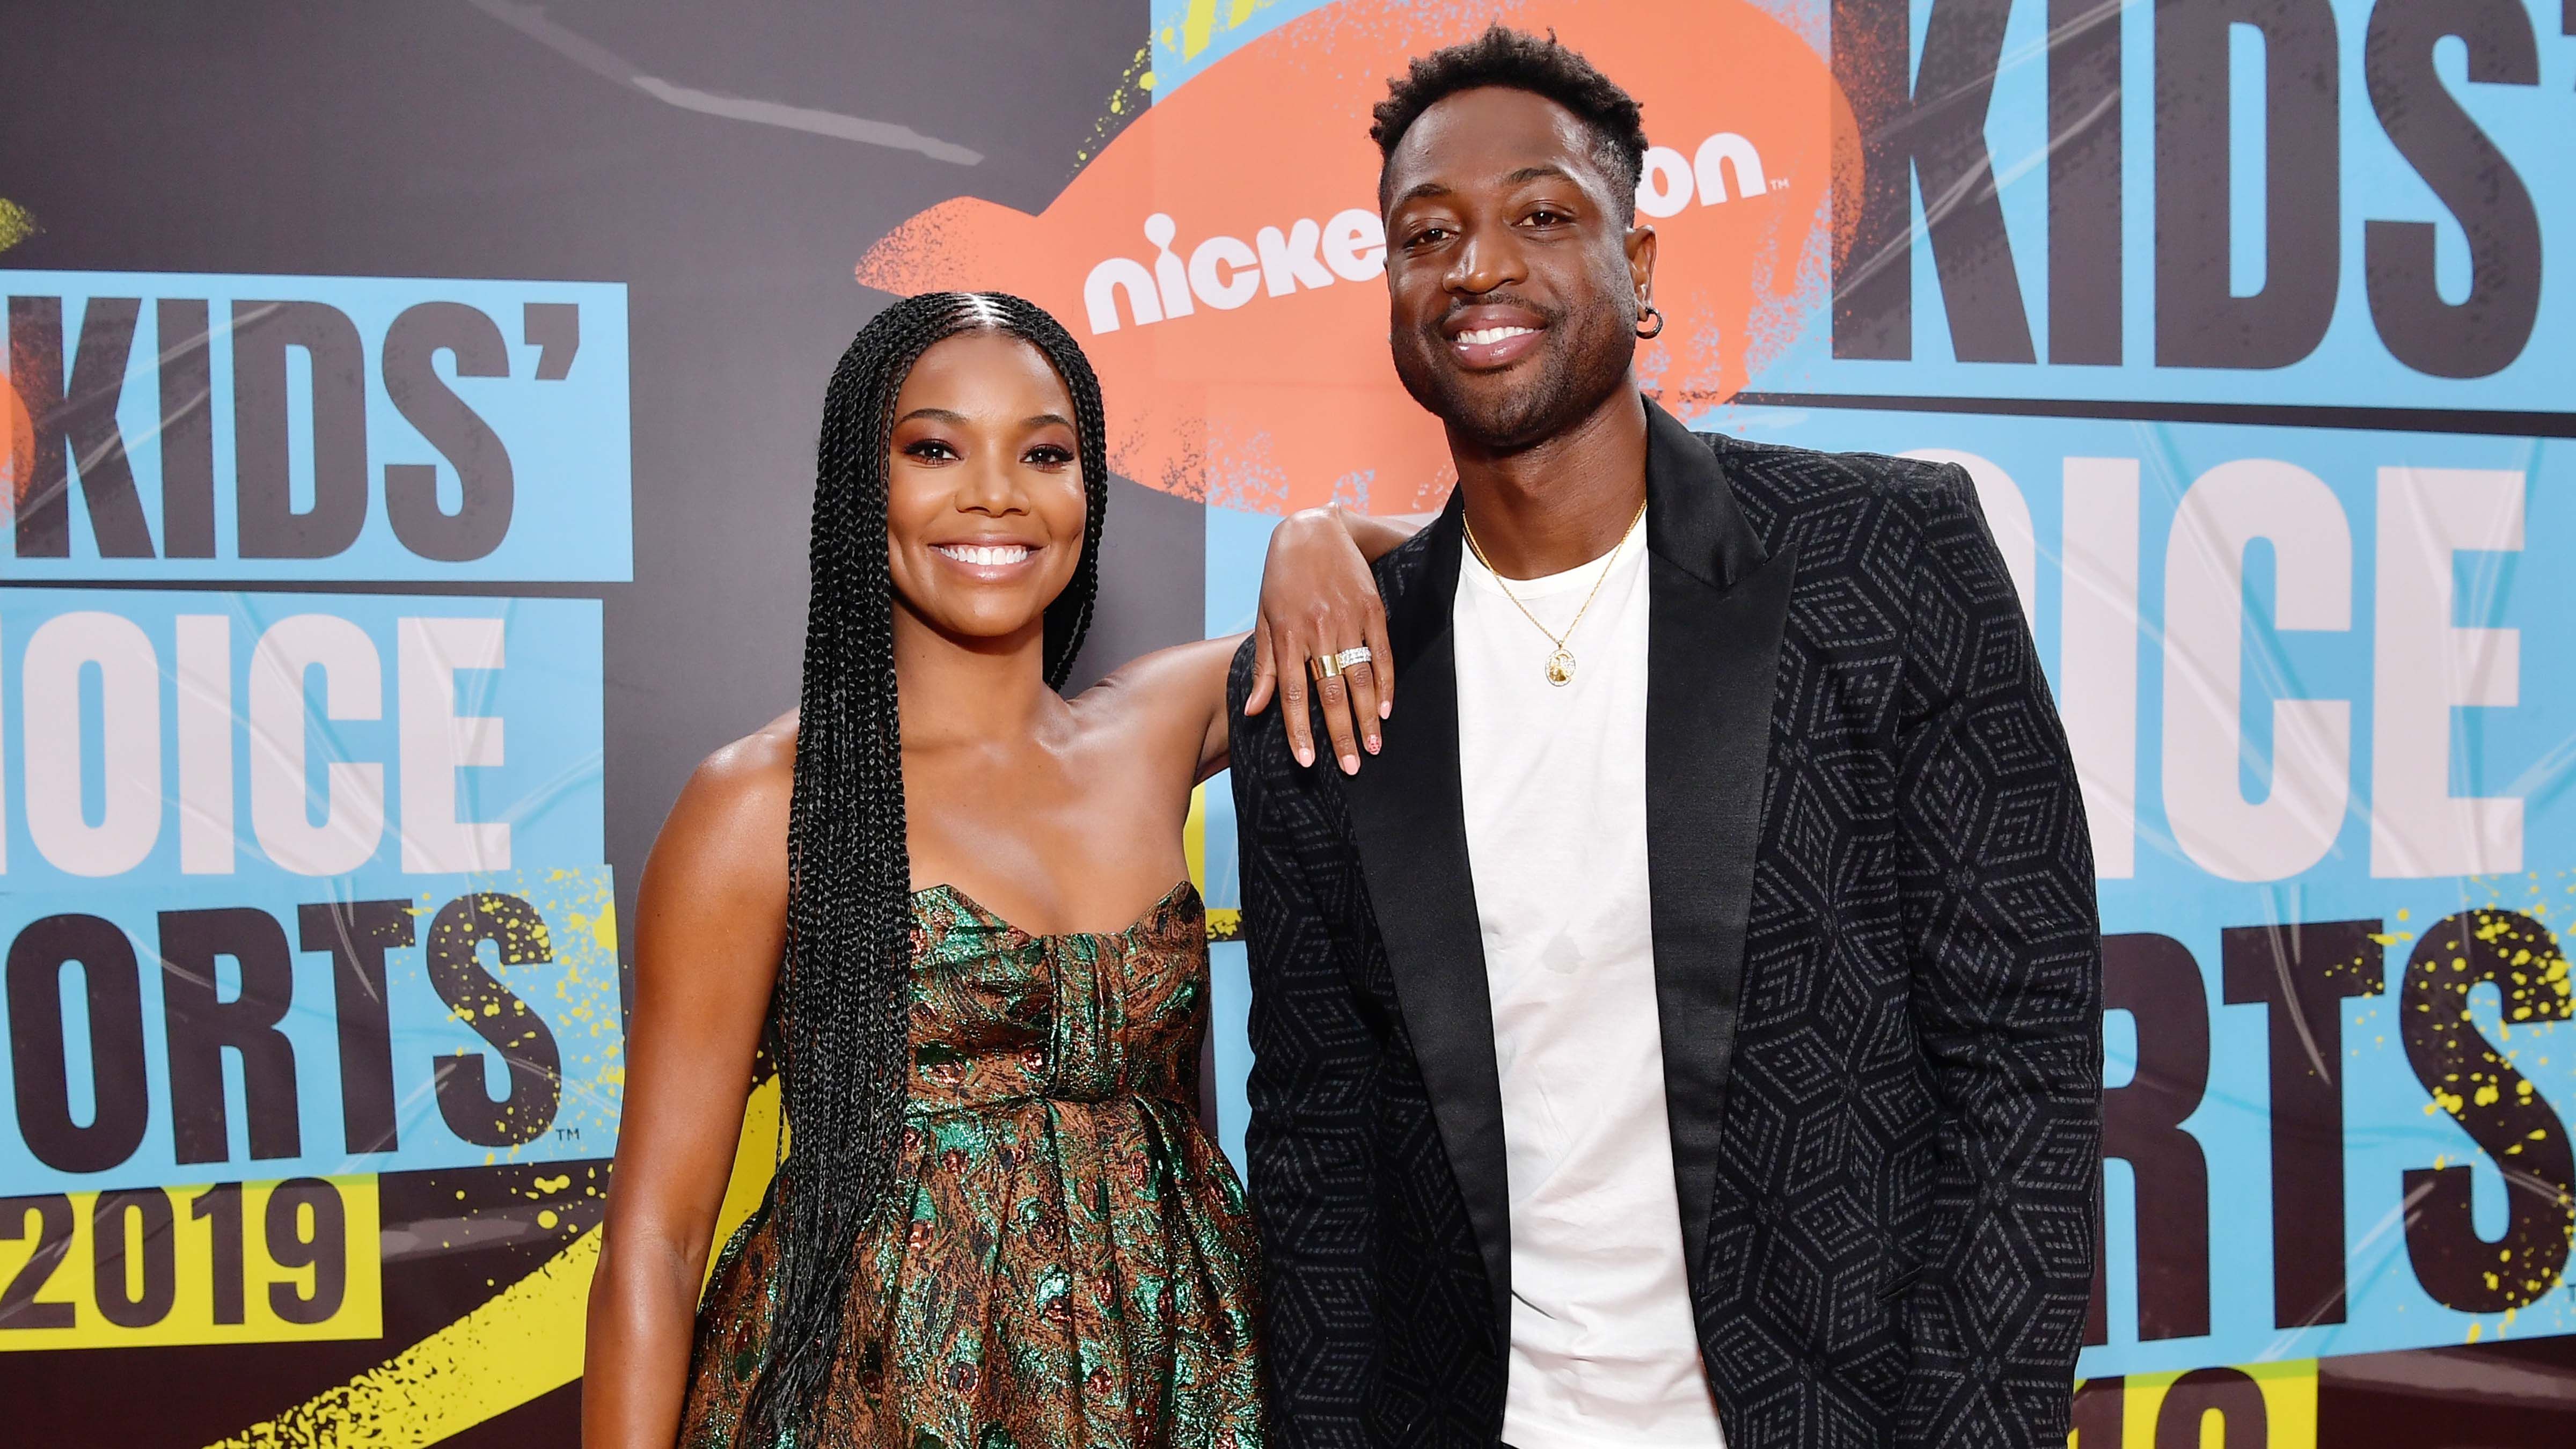 Gabrielle Union On Dwyane Wade Having A Child With Another Woman